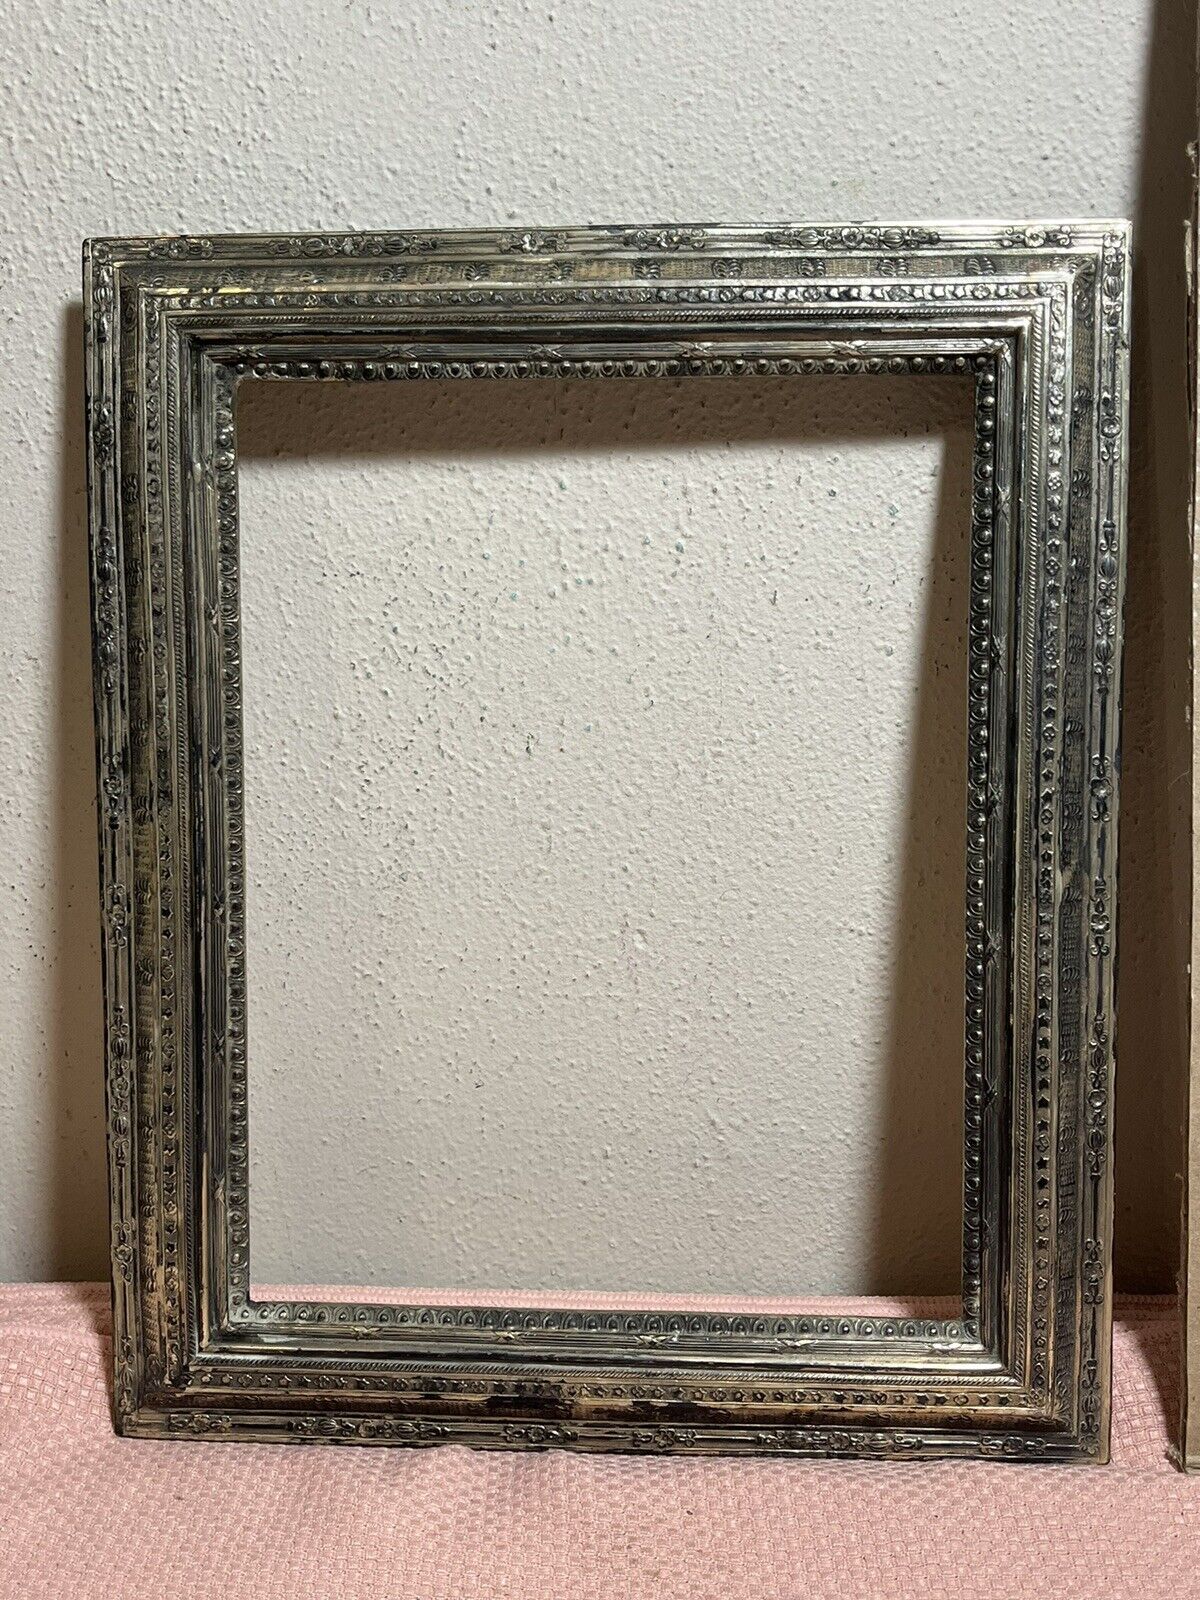 Vintage 12” x 10” MCM Ornate Silverplate Picture Frame